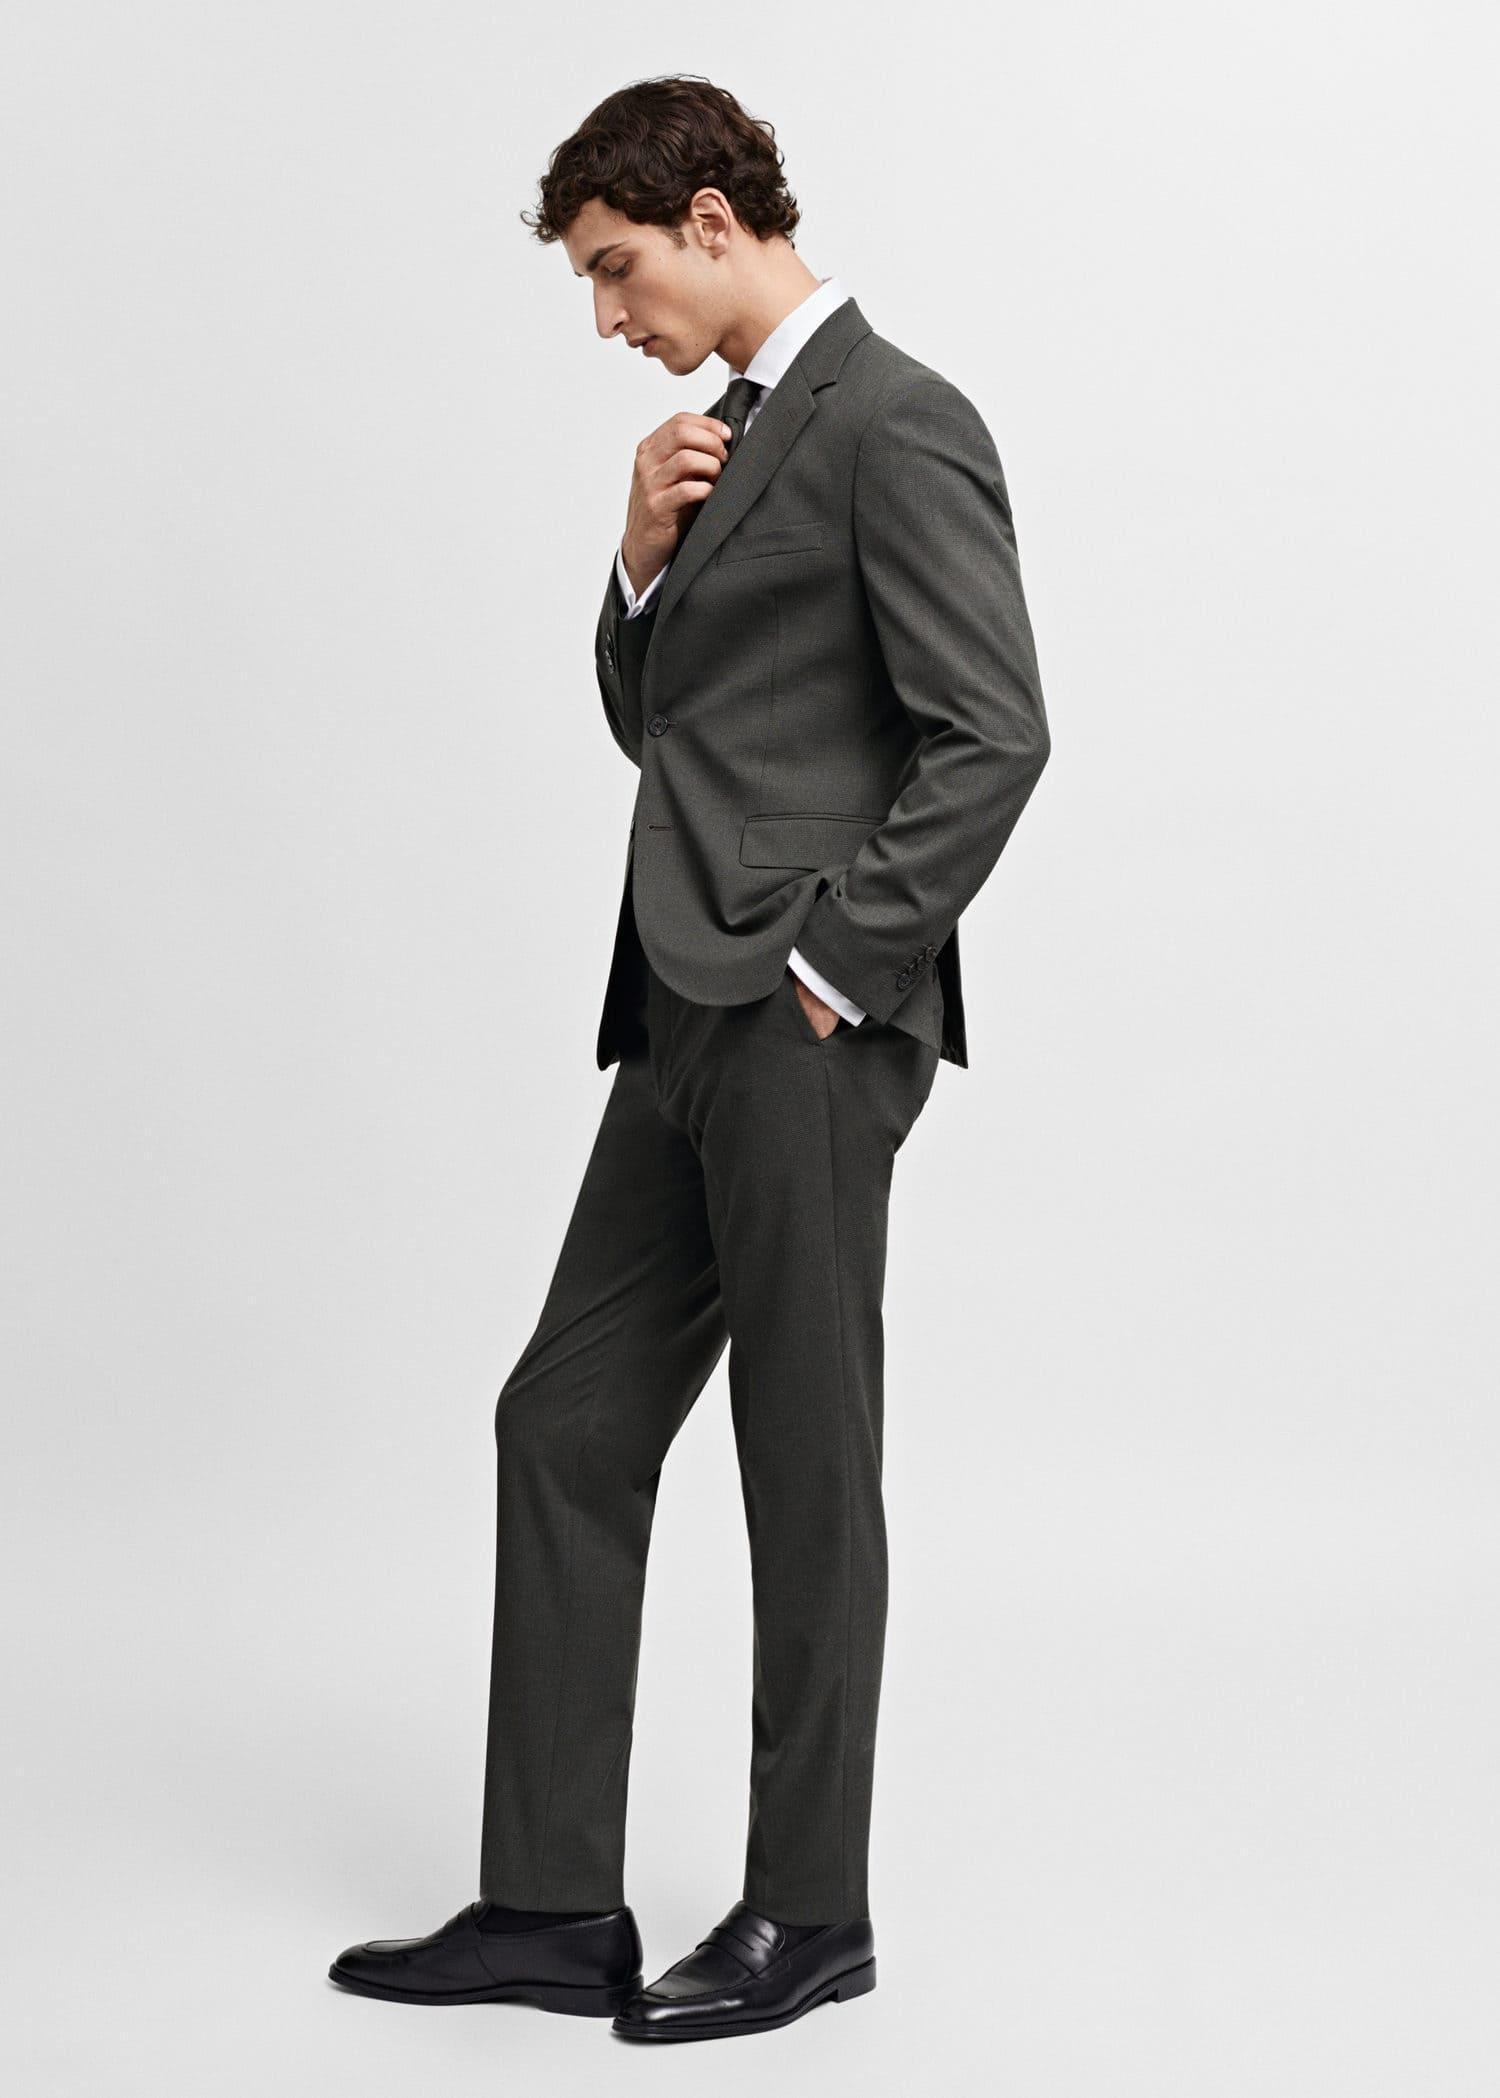 Mango - Green Stretch Fabric Slim-Fit Suit Trousers